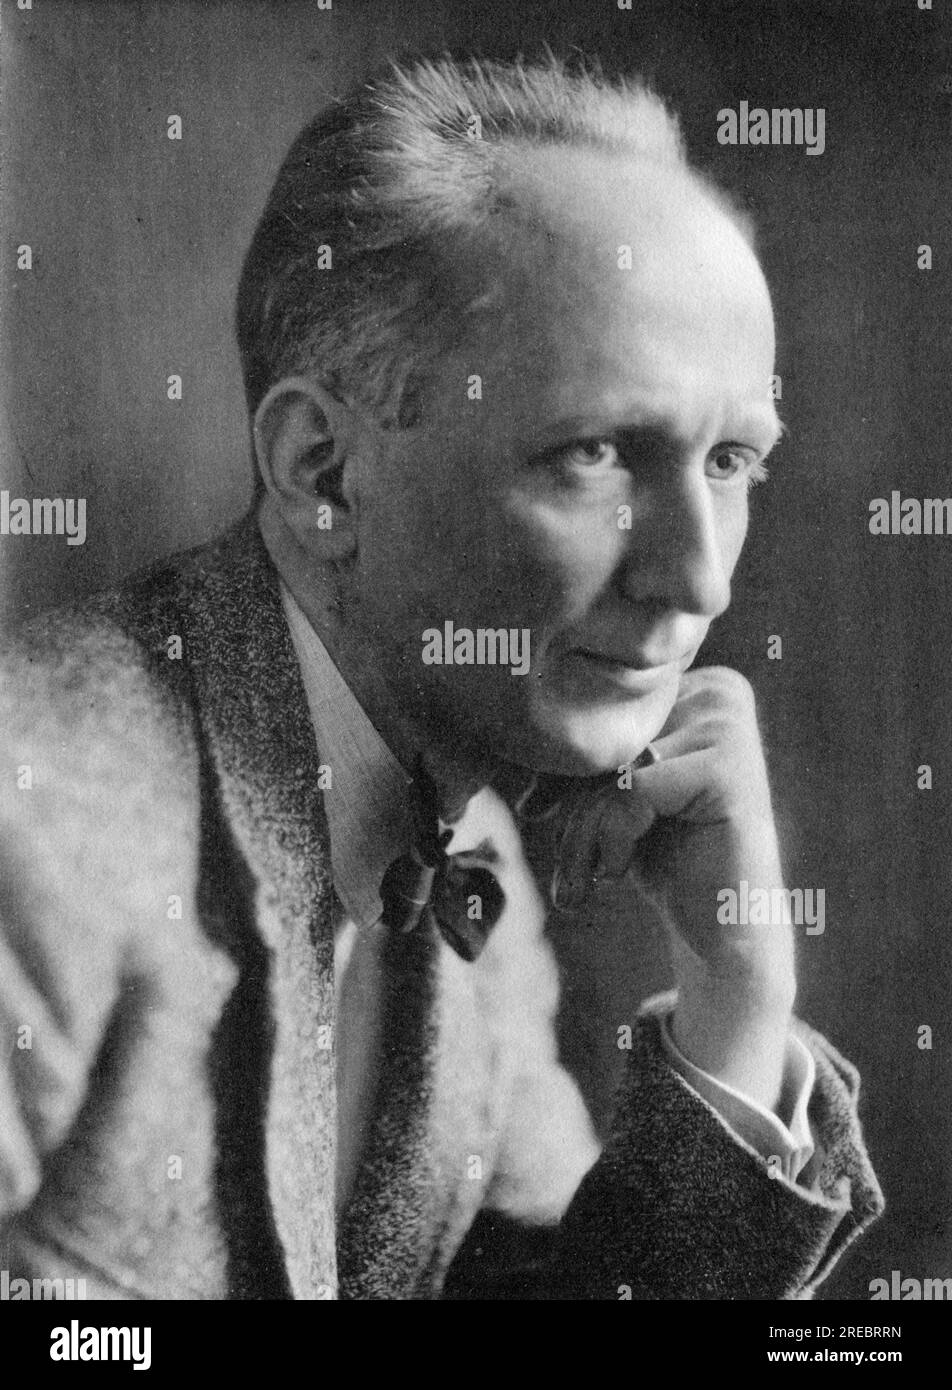 Thiess, Frank, 13.3.1890 - 22.12.1977, deutscher Schriftsteller, ca. 1930, ADDITIONAL-RIGHTS-CLEARANCE-INFO-NOT-AVAILABLE Stockfoto